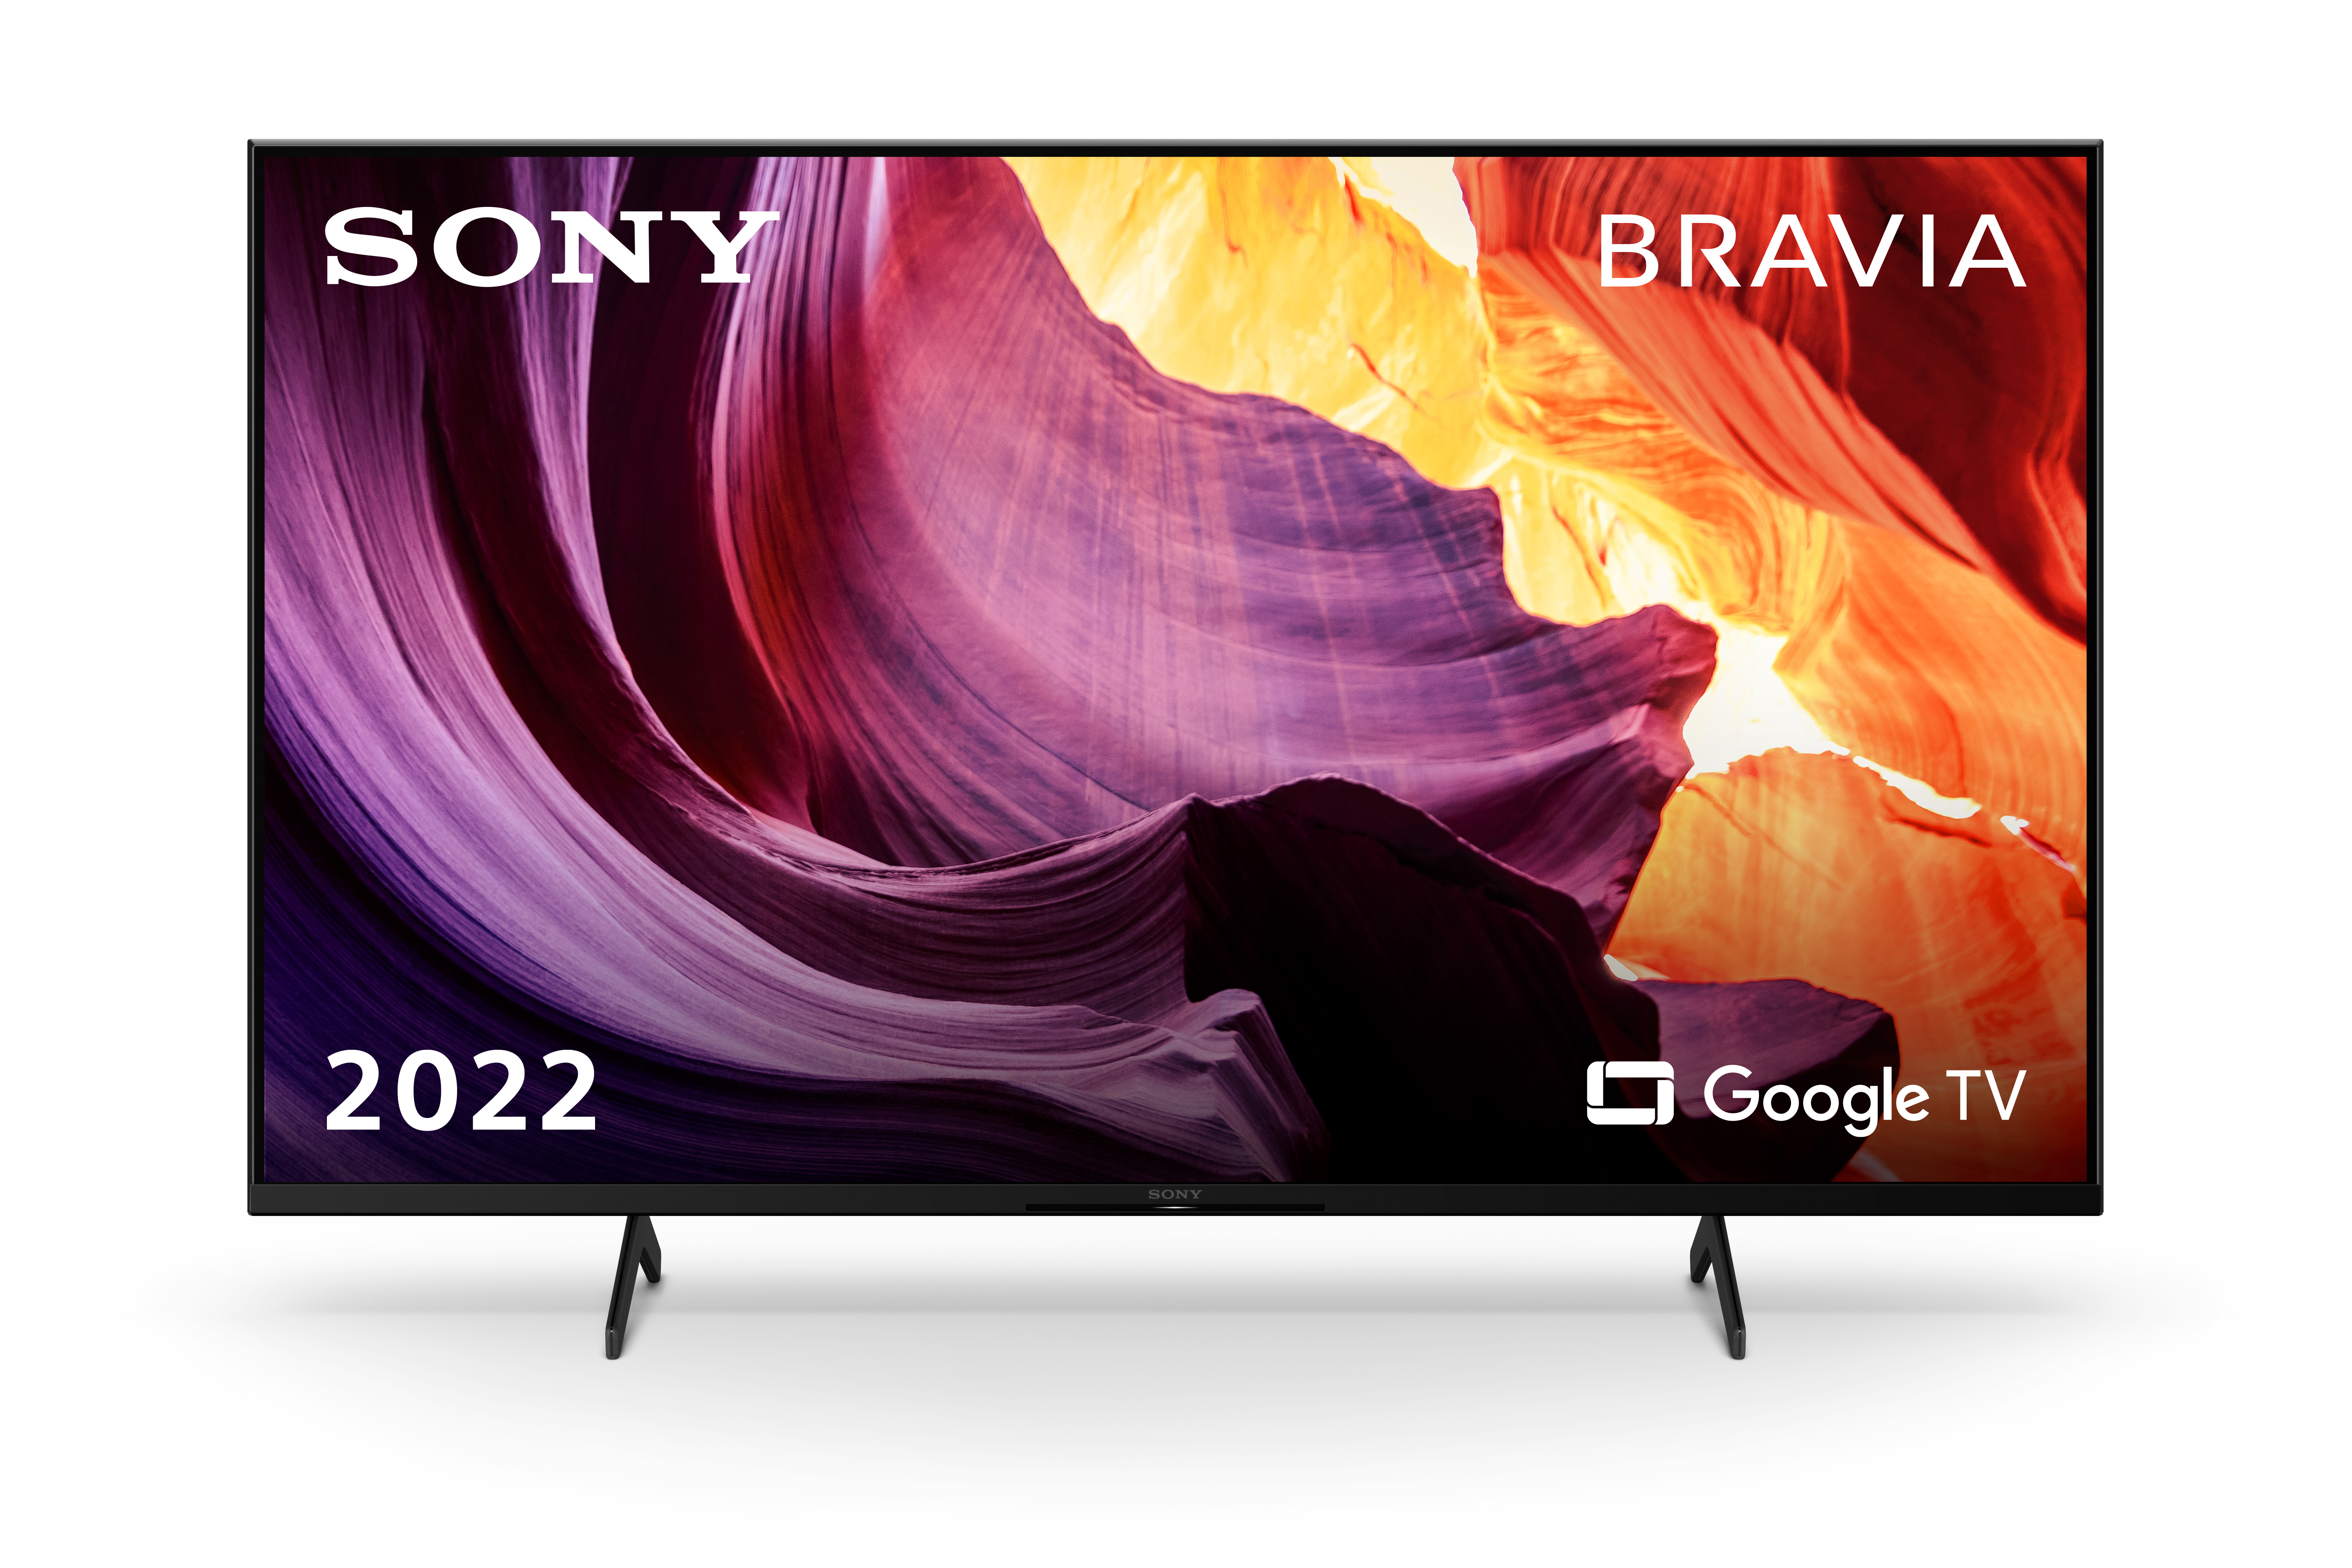 Image of Sony BRAVIA, KD-55X81K, Smart Google TV, 55”, LED, 4K UHD, HDR, Perfect for Playstation, con BRAVIA CORE